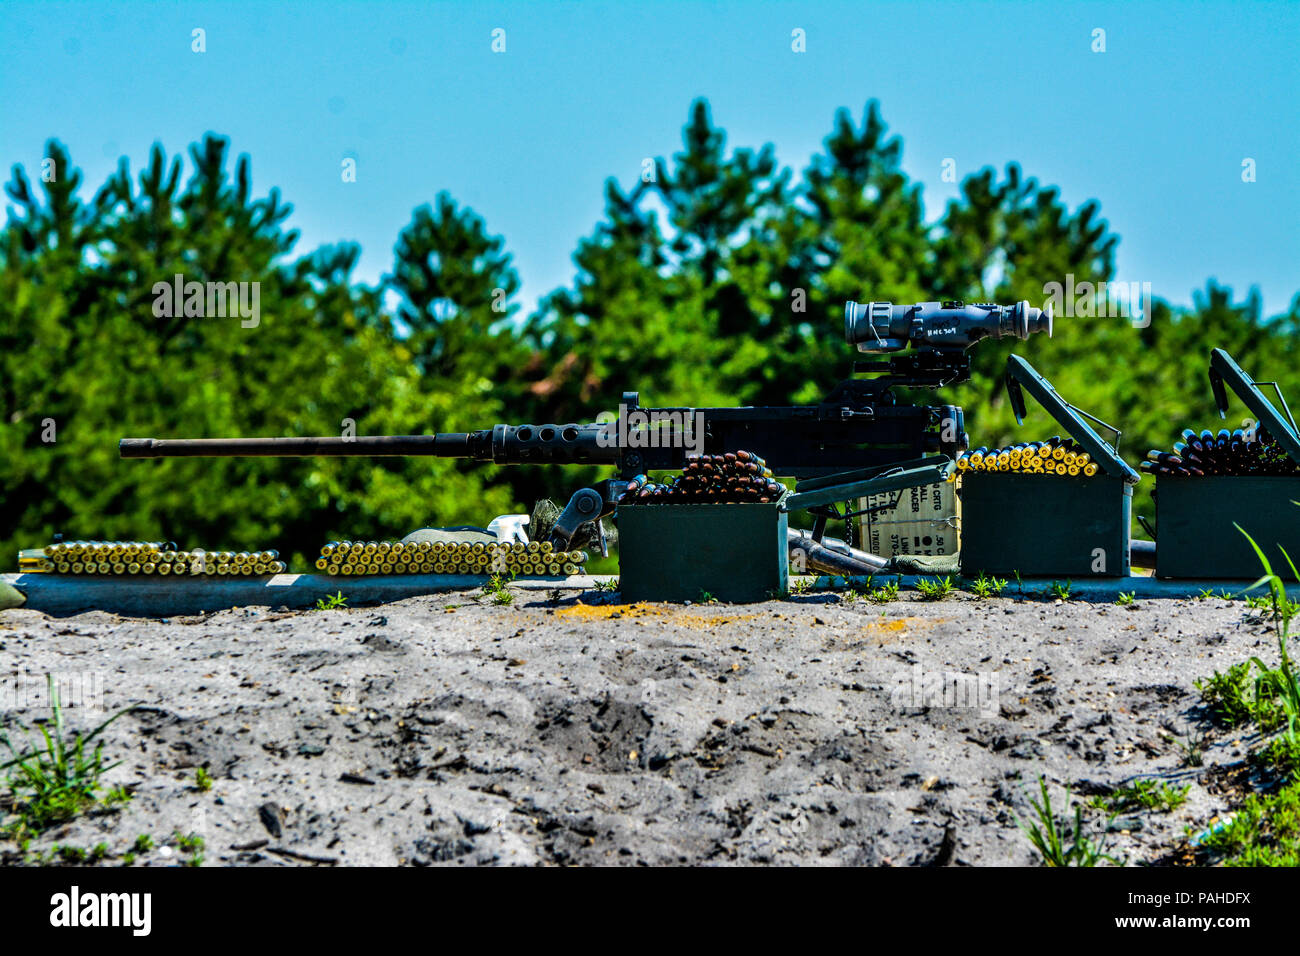 An M2 machine gun is staged for qualification fire during Operation Cold Steel II, hosted by U.S. Army Civil Affairs and Psychological Operations Command (Airborne), July 11, 2018 at Joint Base McGuire-Dix-Lakehurst, N.J. Operation Cold Steel is the U.S. Army Reserve's crew-served weapons qualification and validation exercise to ensure America's Army Reserve units and Soldiers are trained and ready to deploy on short notice as part of Ready Force X and bring combat-ready and lethal firepower in support of the Army and our joint partners anywhere around the world. (U.S. Army Reserve photo by Sp Stock Photo